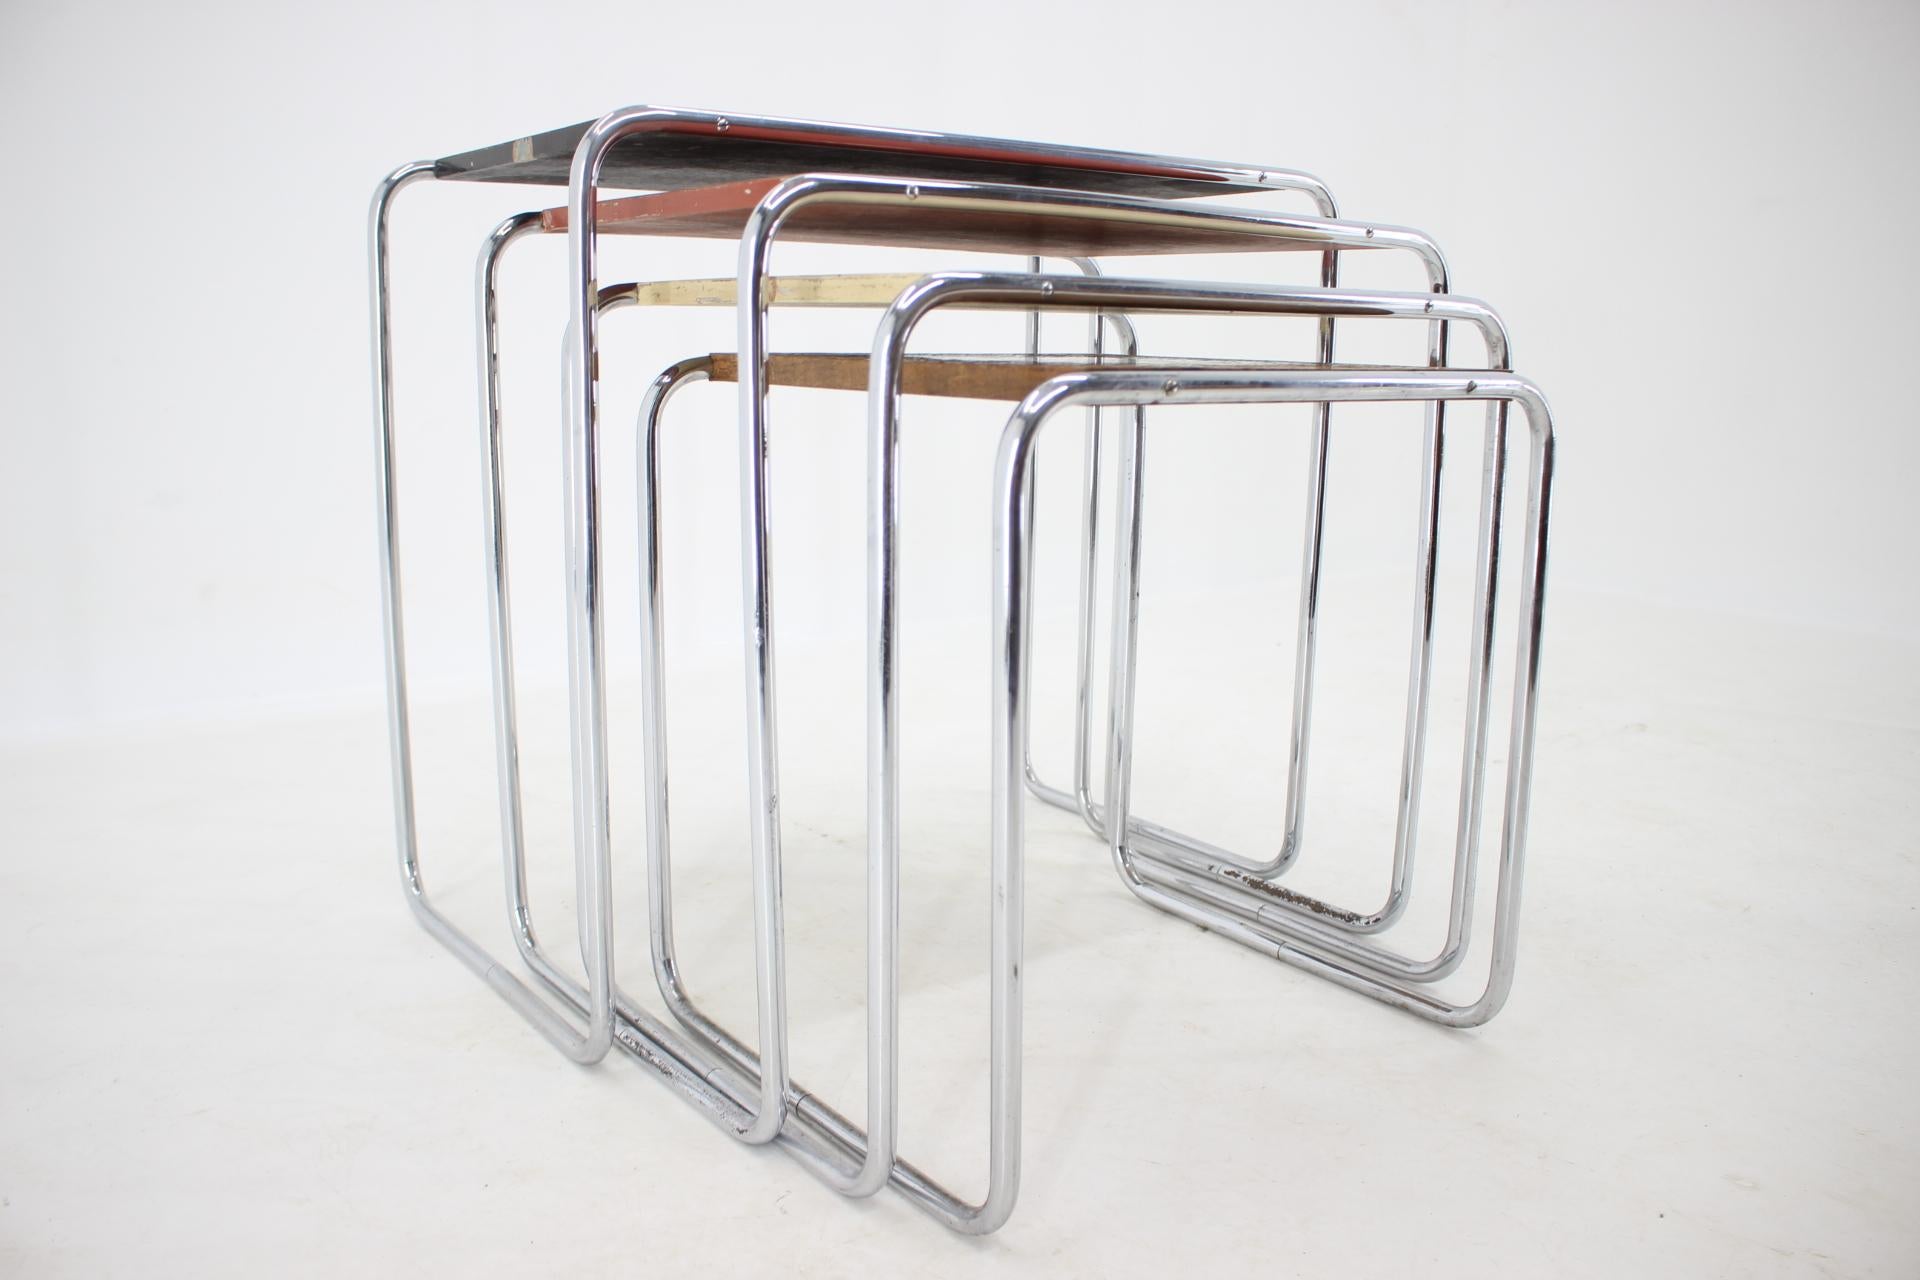 - 1930s
- Czechoslovakia
- Designed by Marcel Breuer
- Model B9
- Manufacturer: Mucke Melder (licensed for Thonet)
- Very good original condition with original colors
- Colored tables practically not seen this time
- Marked by Manufacturer.